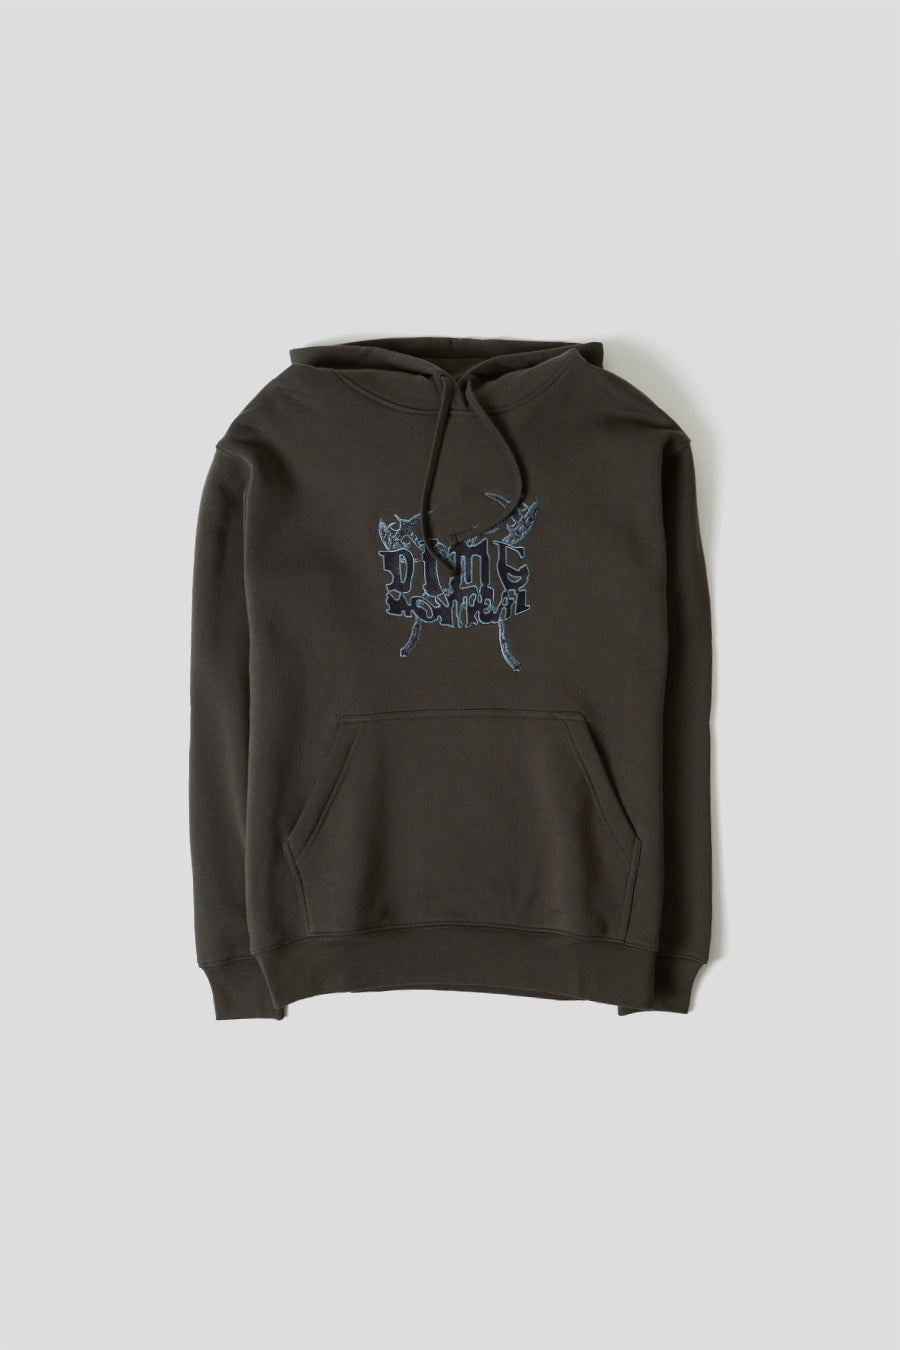 Dime - FADED BLACK AXE HOODIE - LE LABO STORE